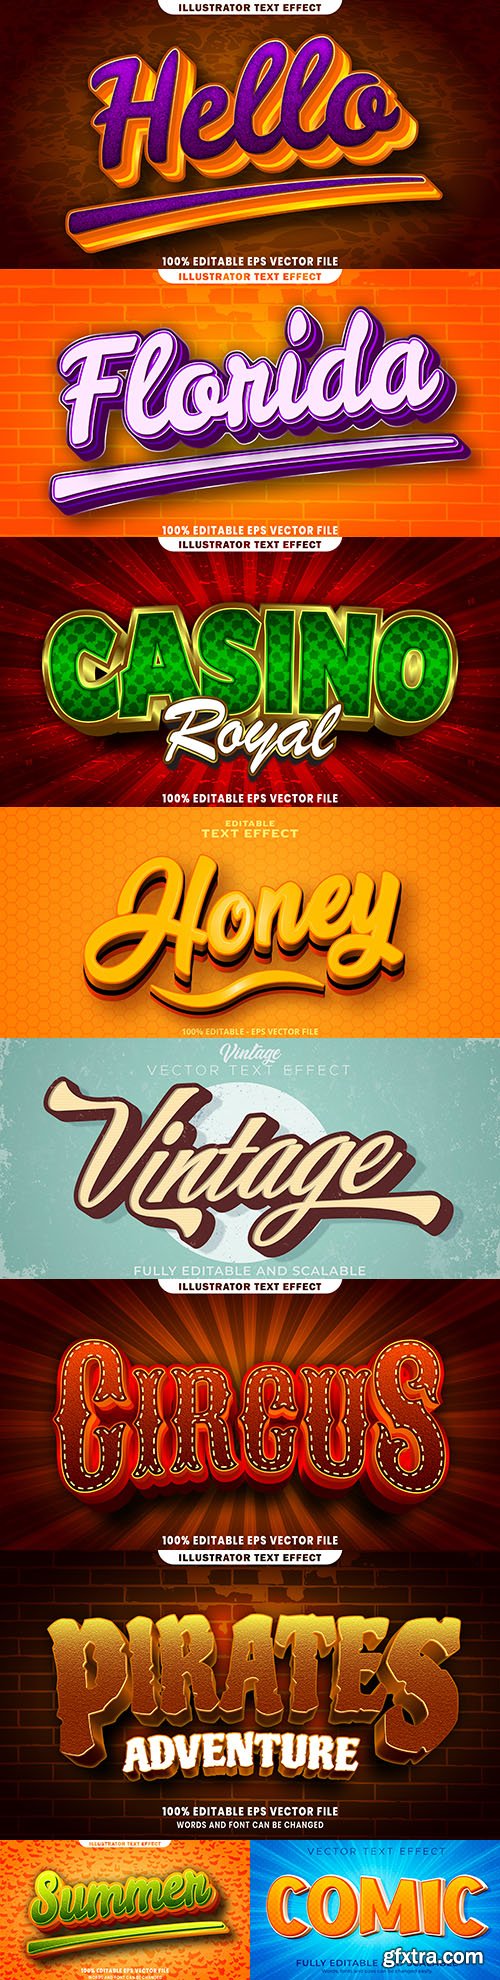 Editable font and 3d effect text design collection illustration 50
